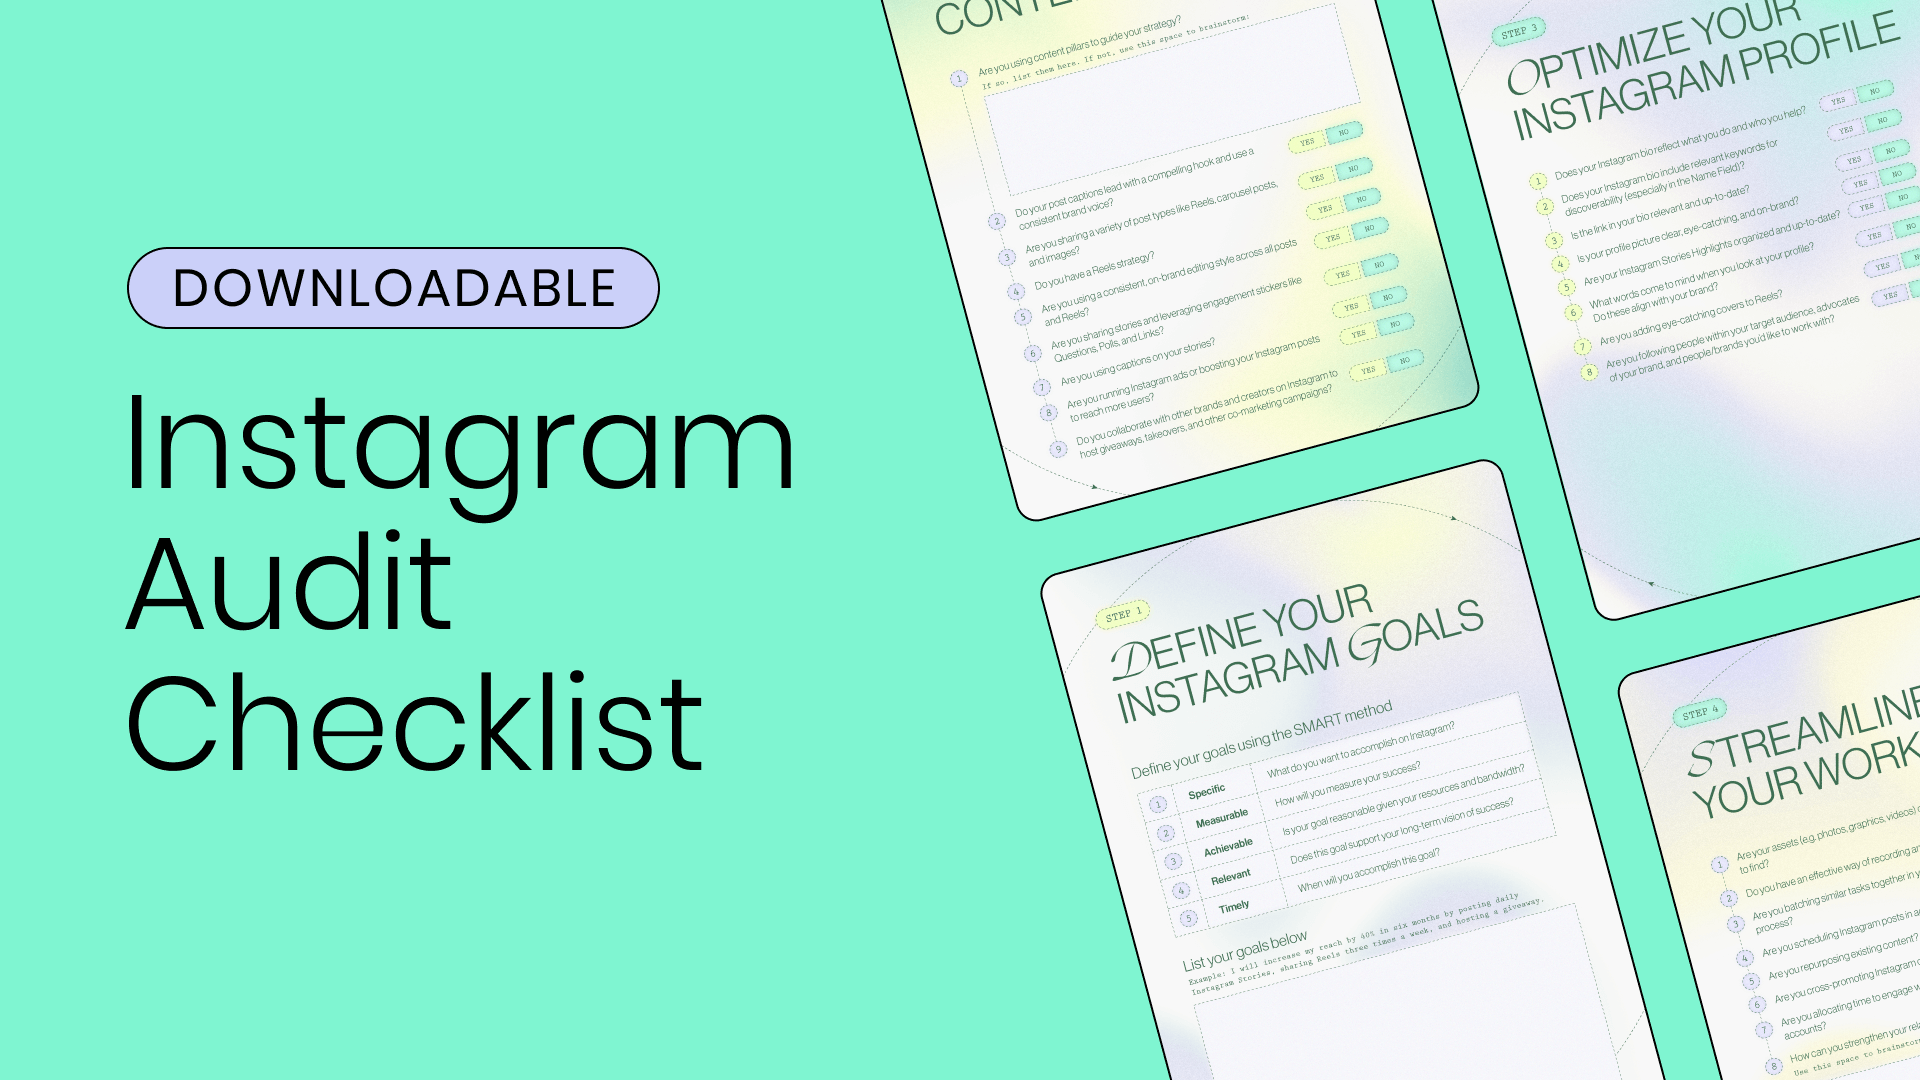 Thumbnail image reading Downloadable Instagram Audit Checklist with checklist graphic in background